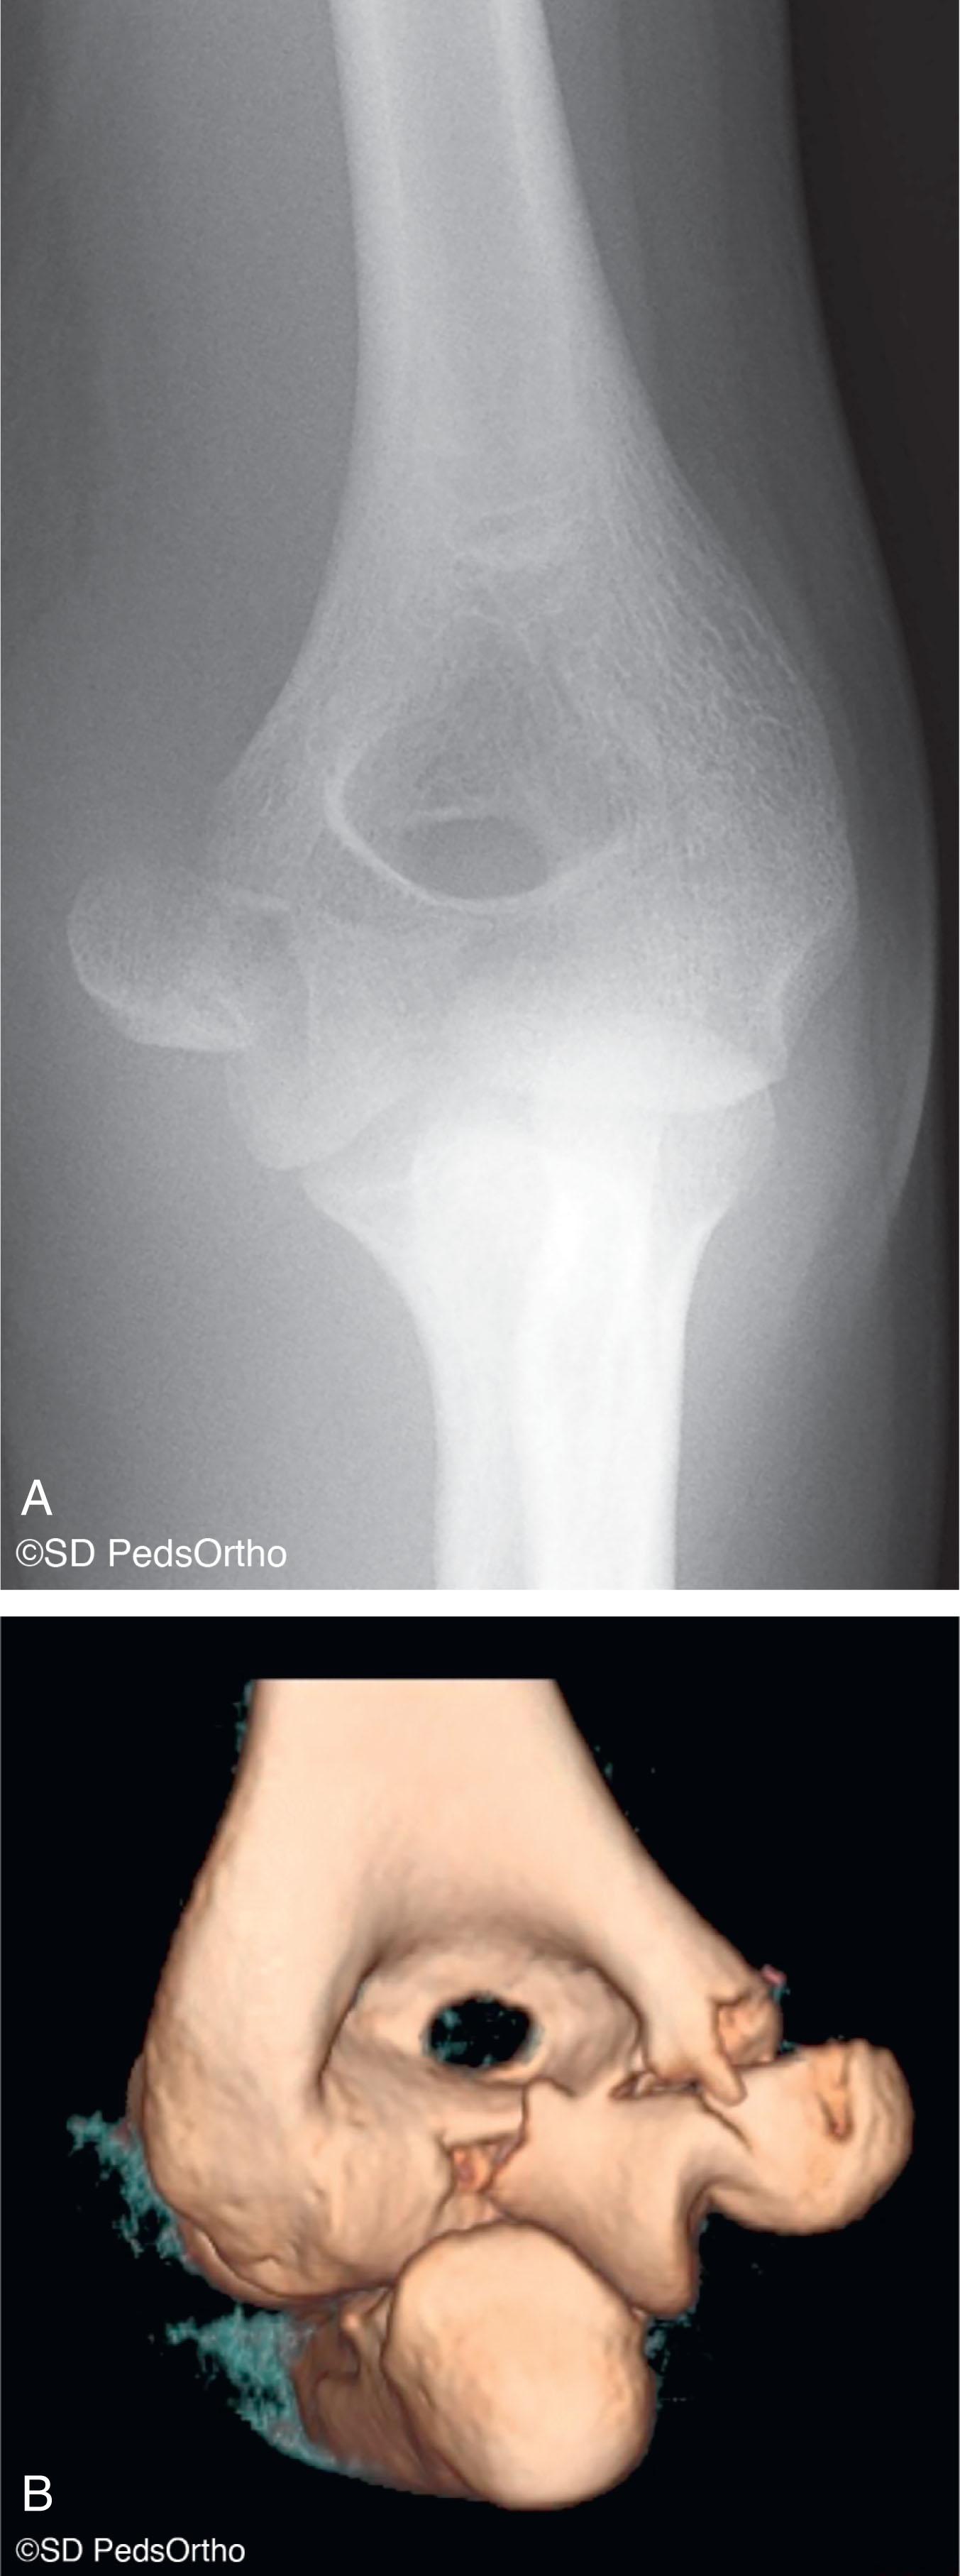 Fig. 4.1, (A) Anteroposterior radiograph showing what appears to be only a medial epicondyle avulsion fracture in a 12-year-old female patient. (B) Computed tomography reconstruction images of the same patient show significant intra-articular extension consistent with a medial condyle fracture.